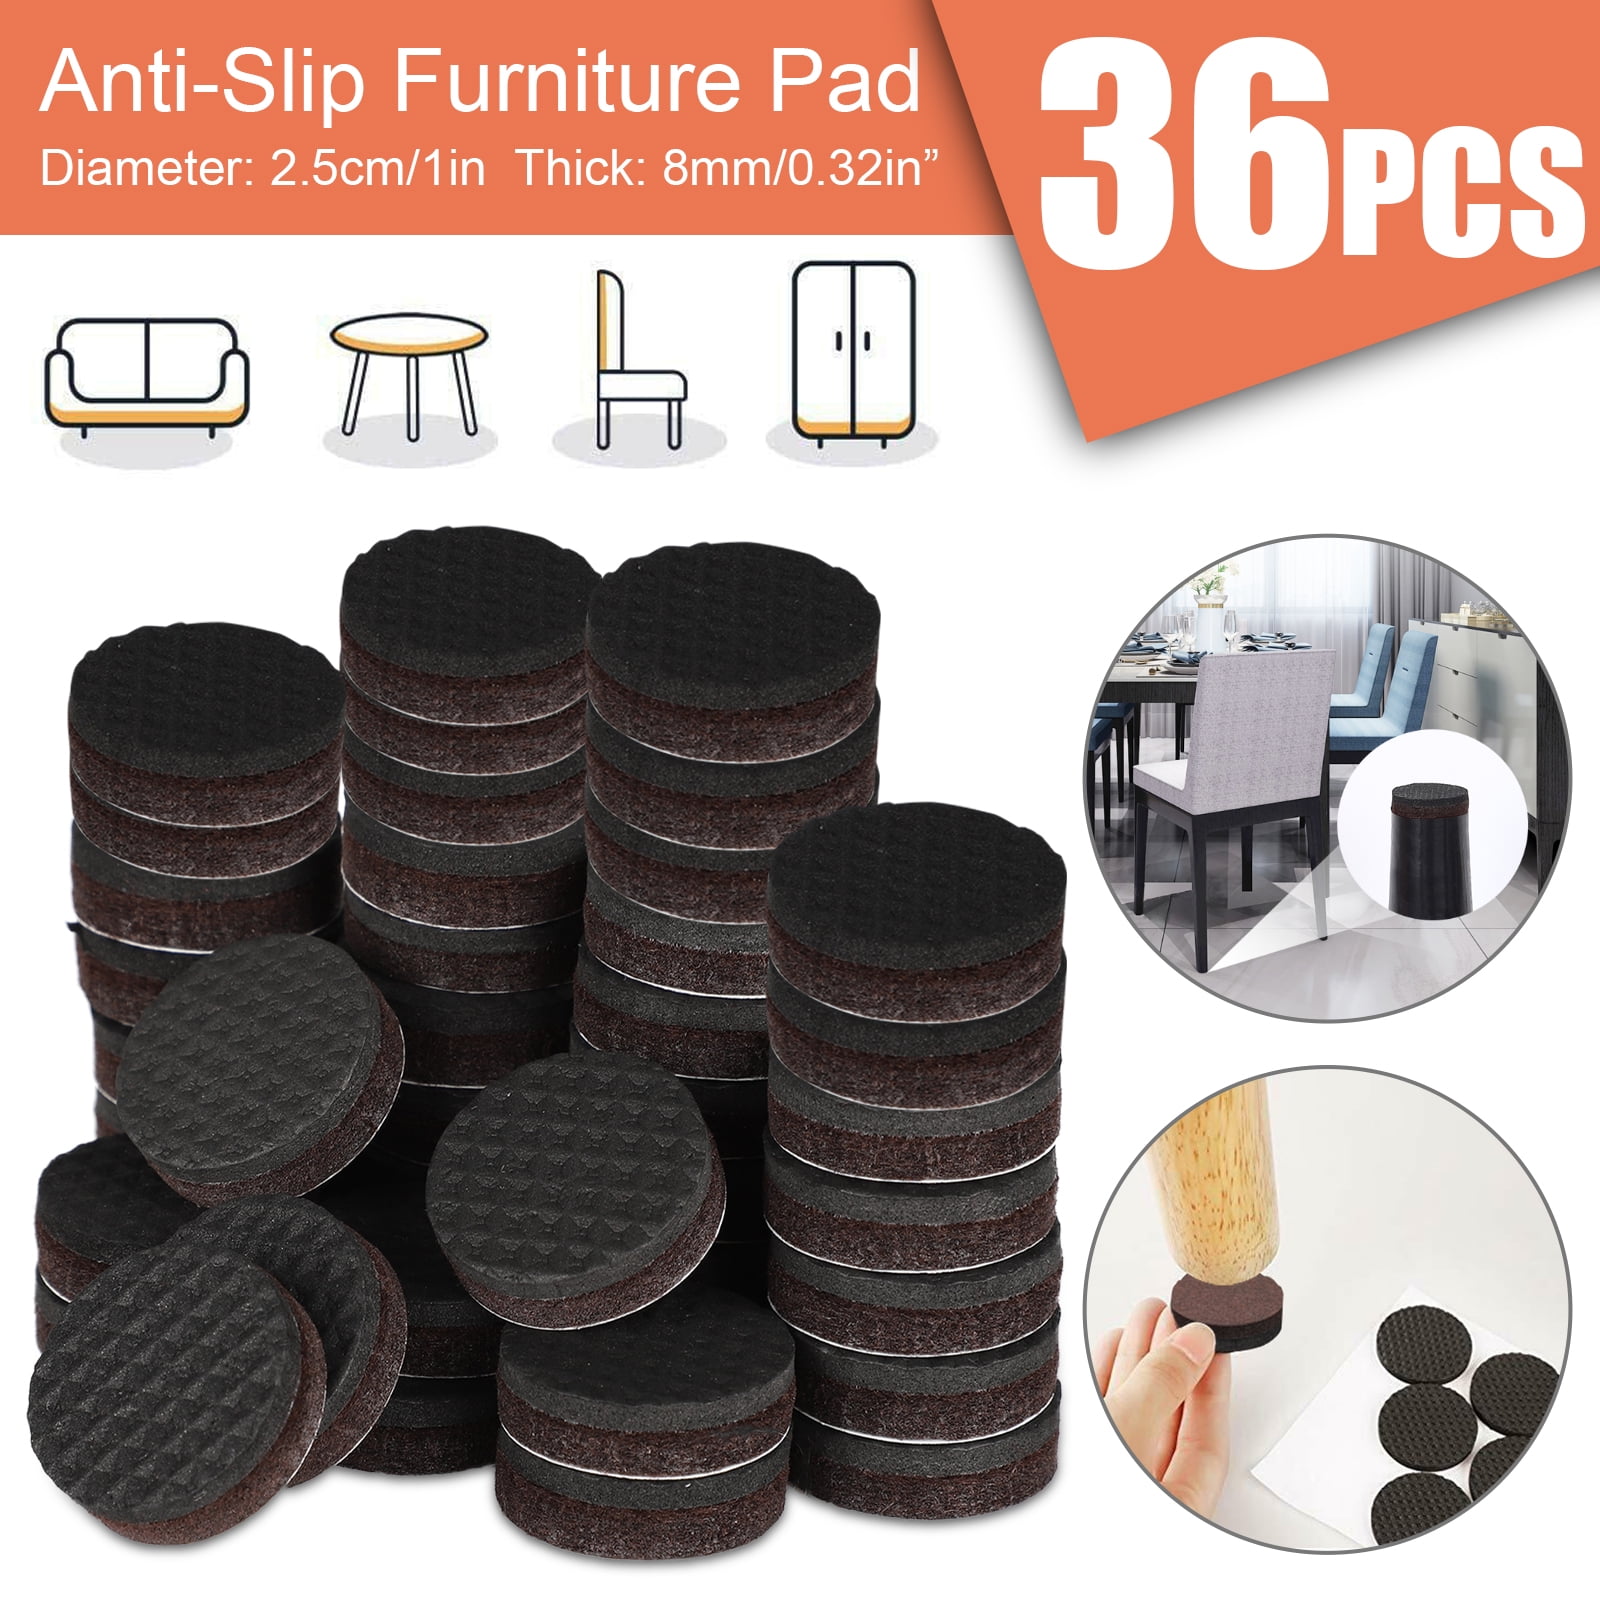 4 Non Slip Rubber Pads Coasters Furniture Floor Protectors Table Chair Feet Leg 